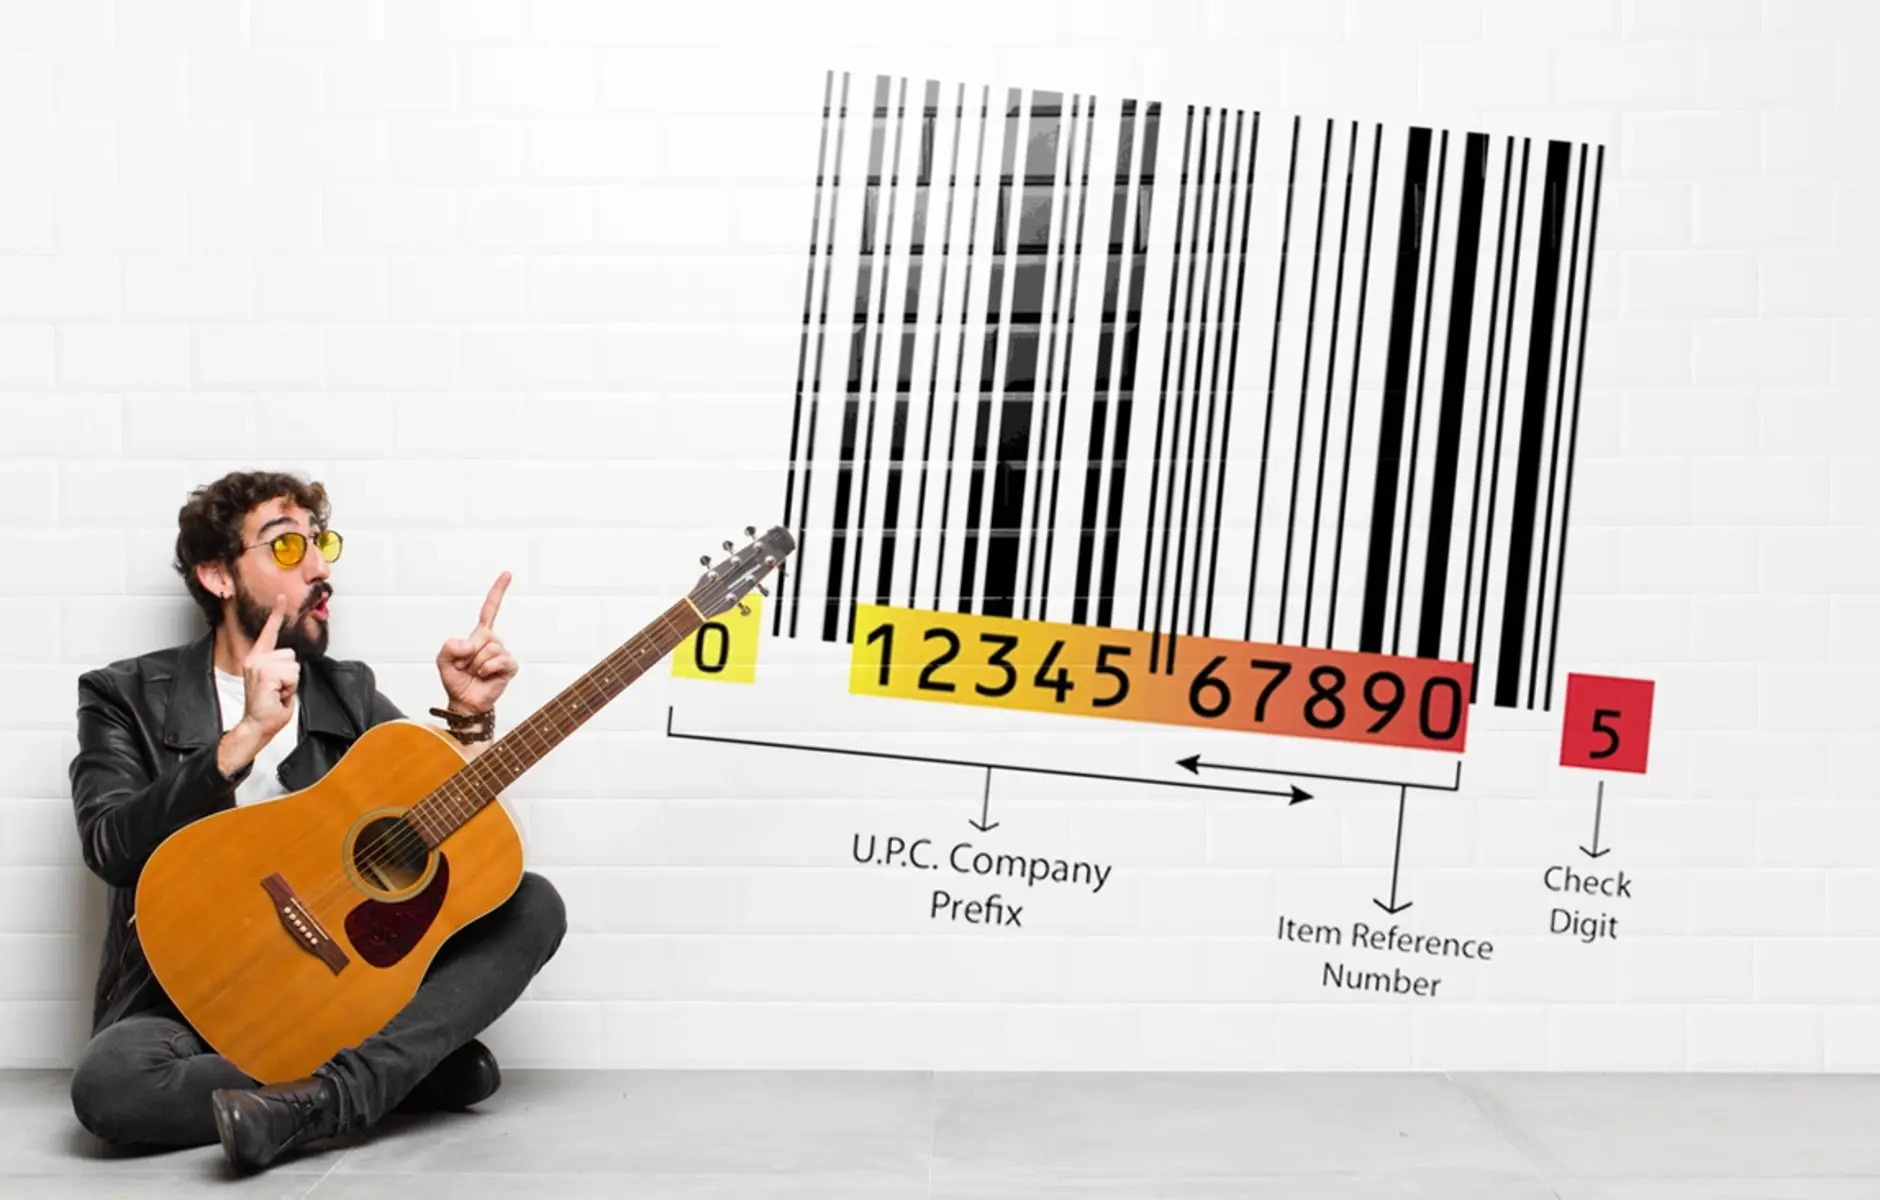 Why Are CD Barcodes Needed To Sell Music Online?